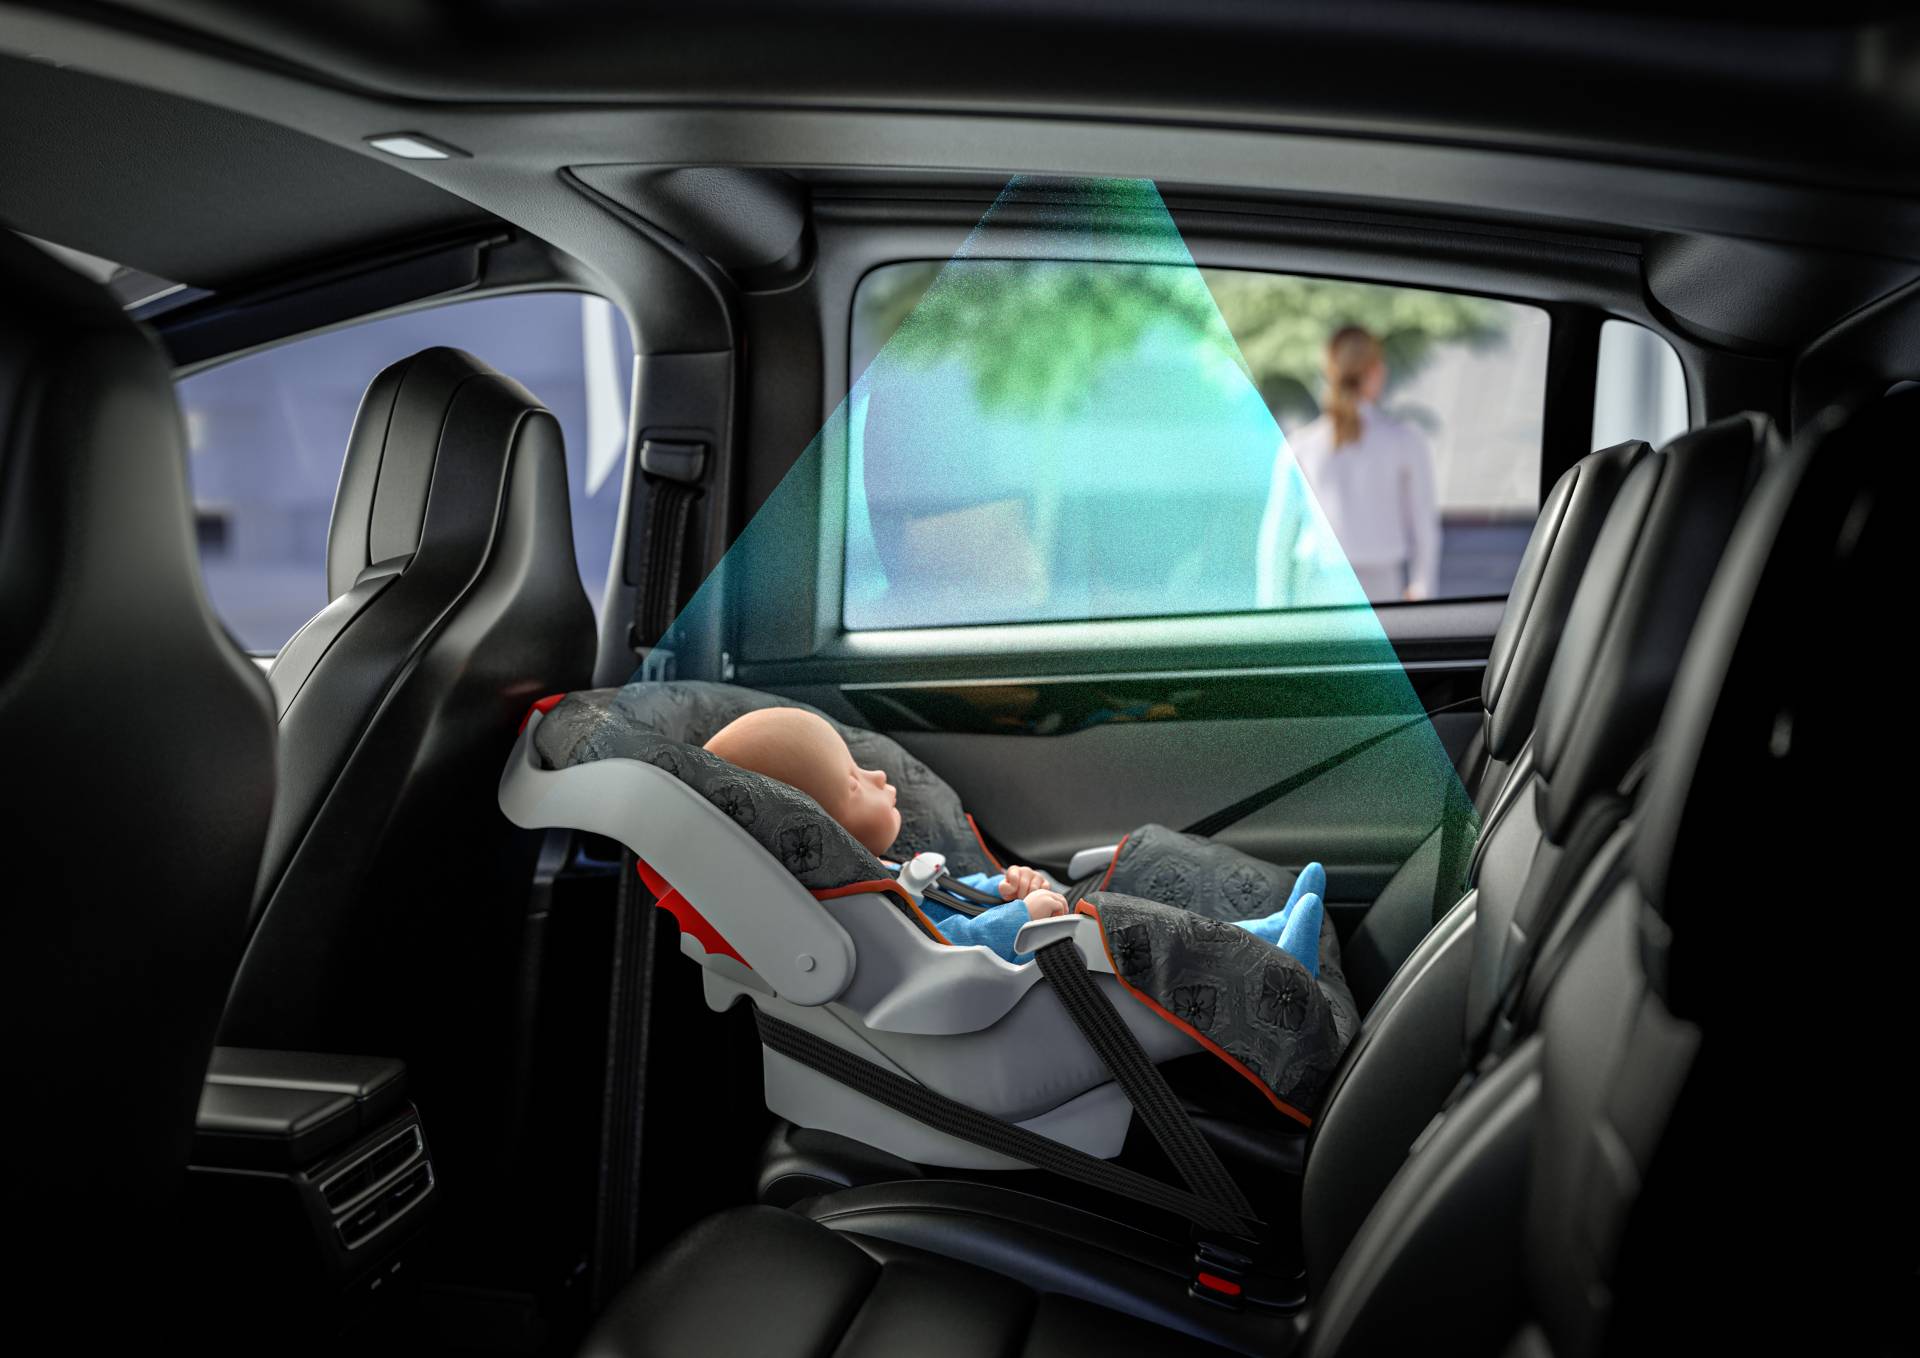 View from the outside of a car with a child seat in the back and UWB satellites for Child Presence Detection.